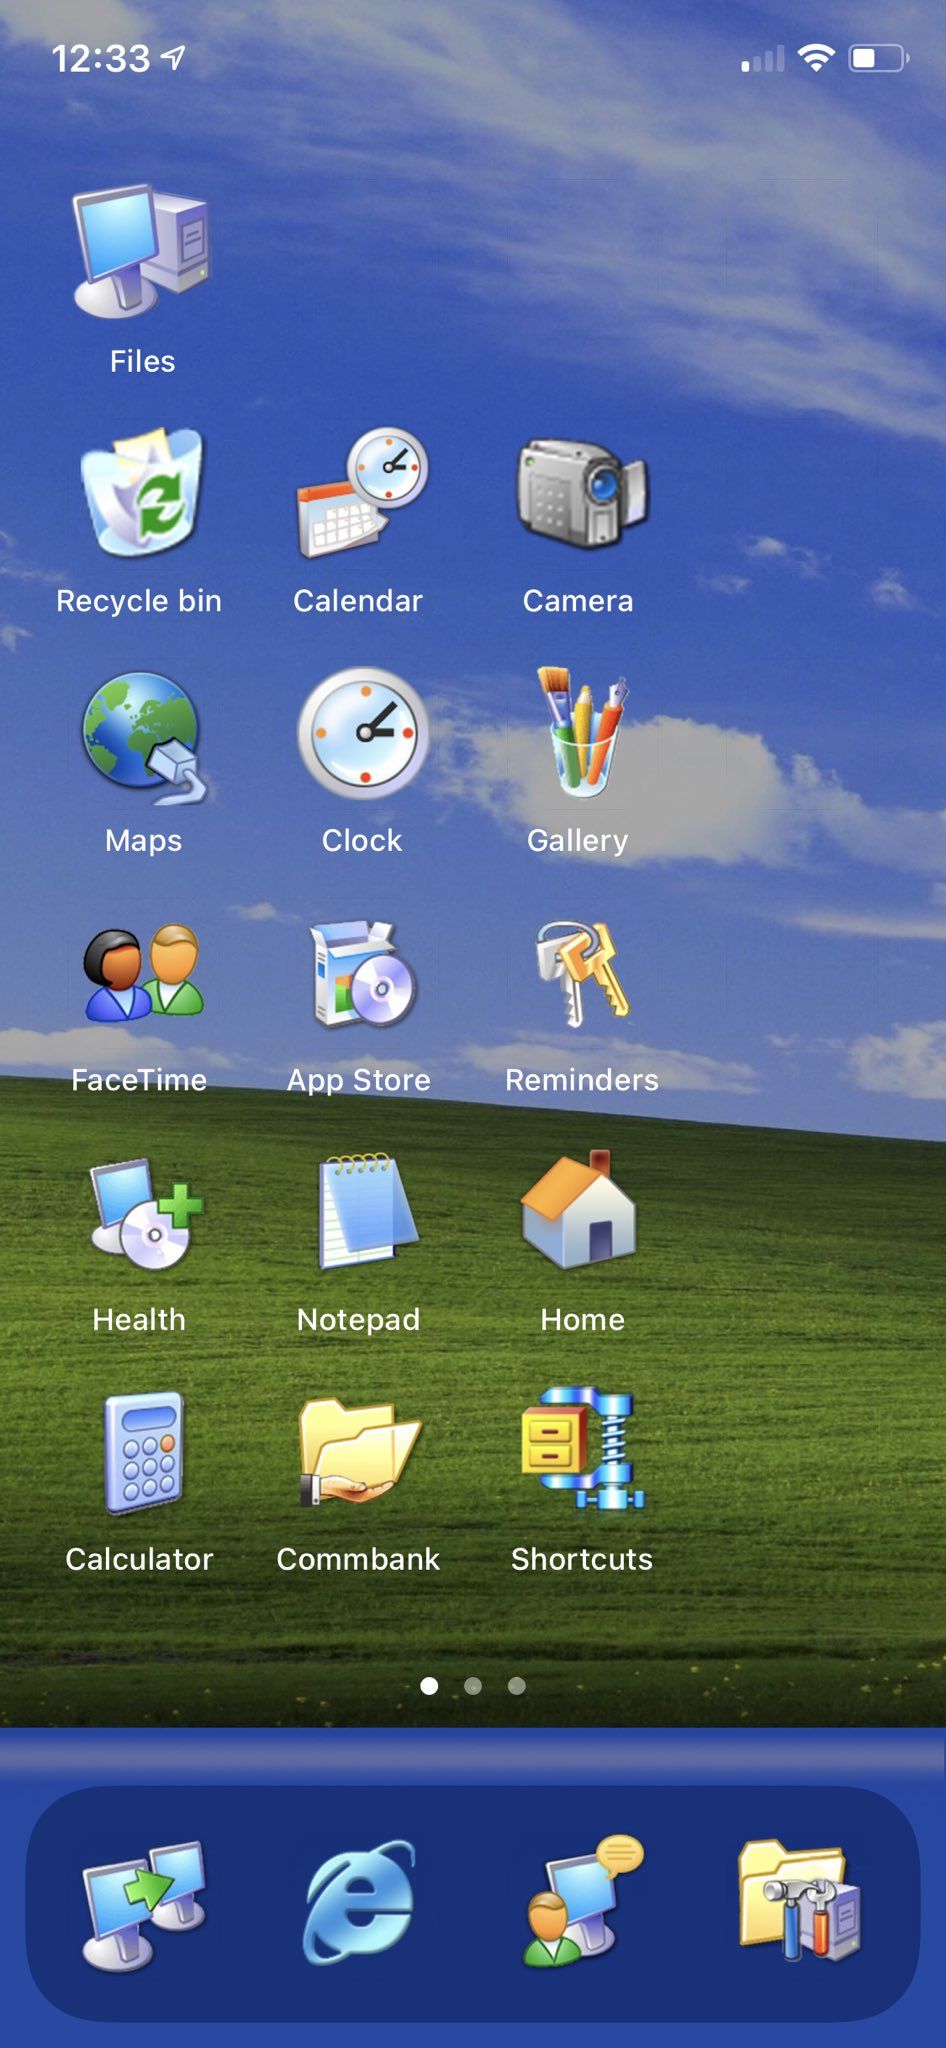 IOS 14 Old Computer (Windows 95) Aesthetic Ideas - STRAPHIE